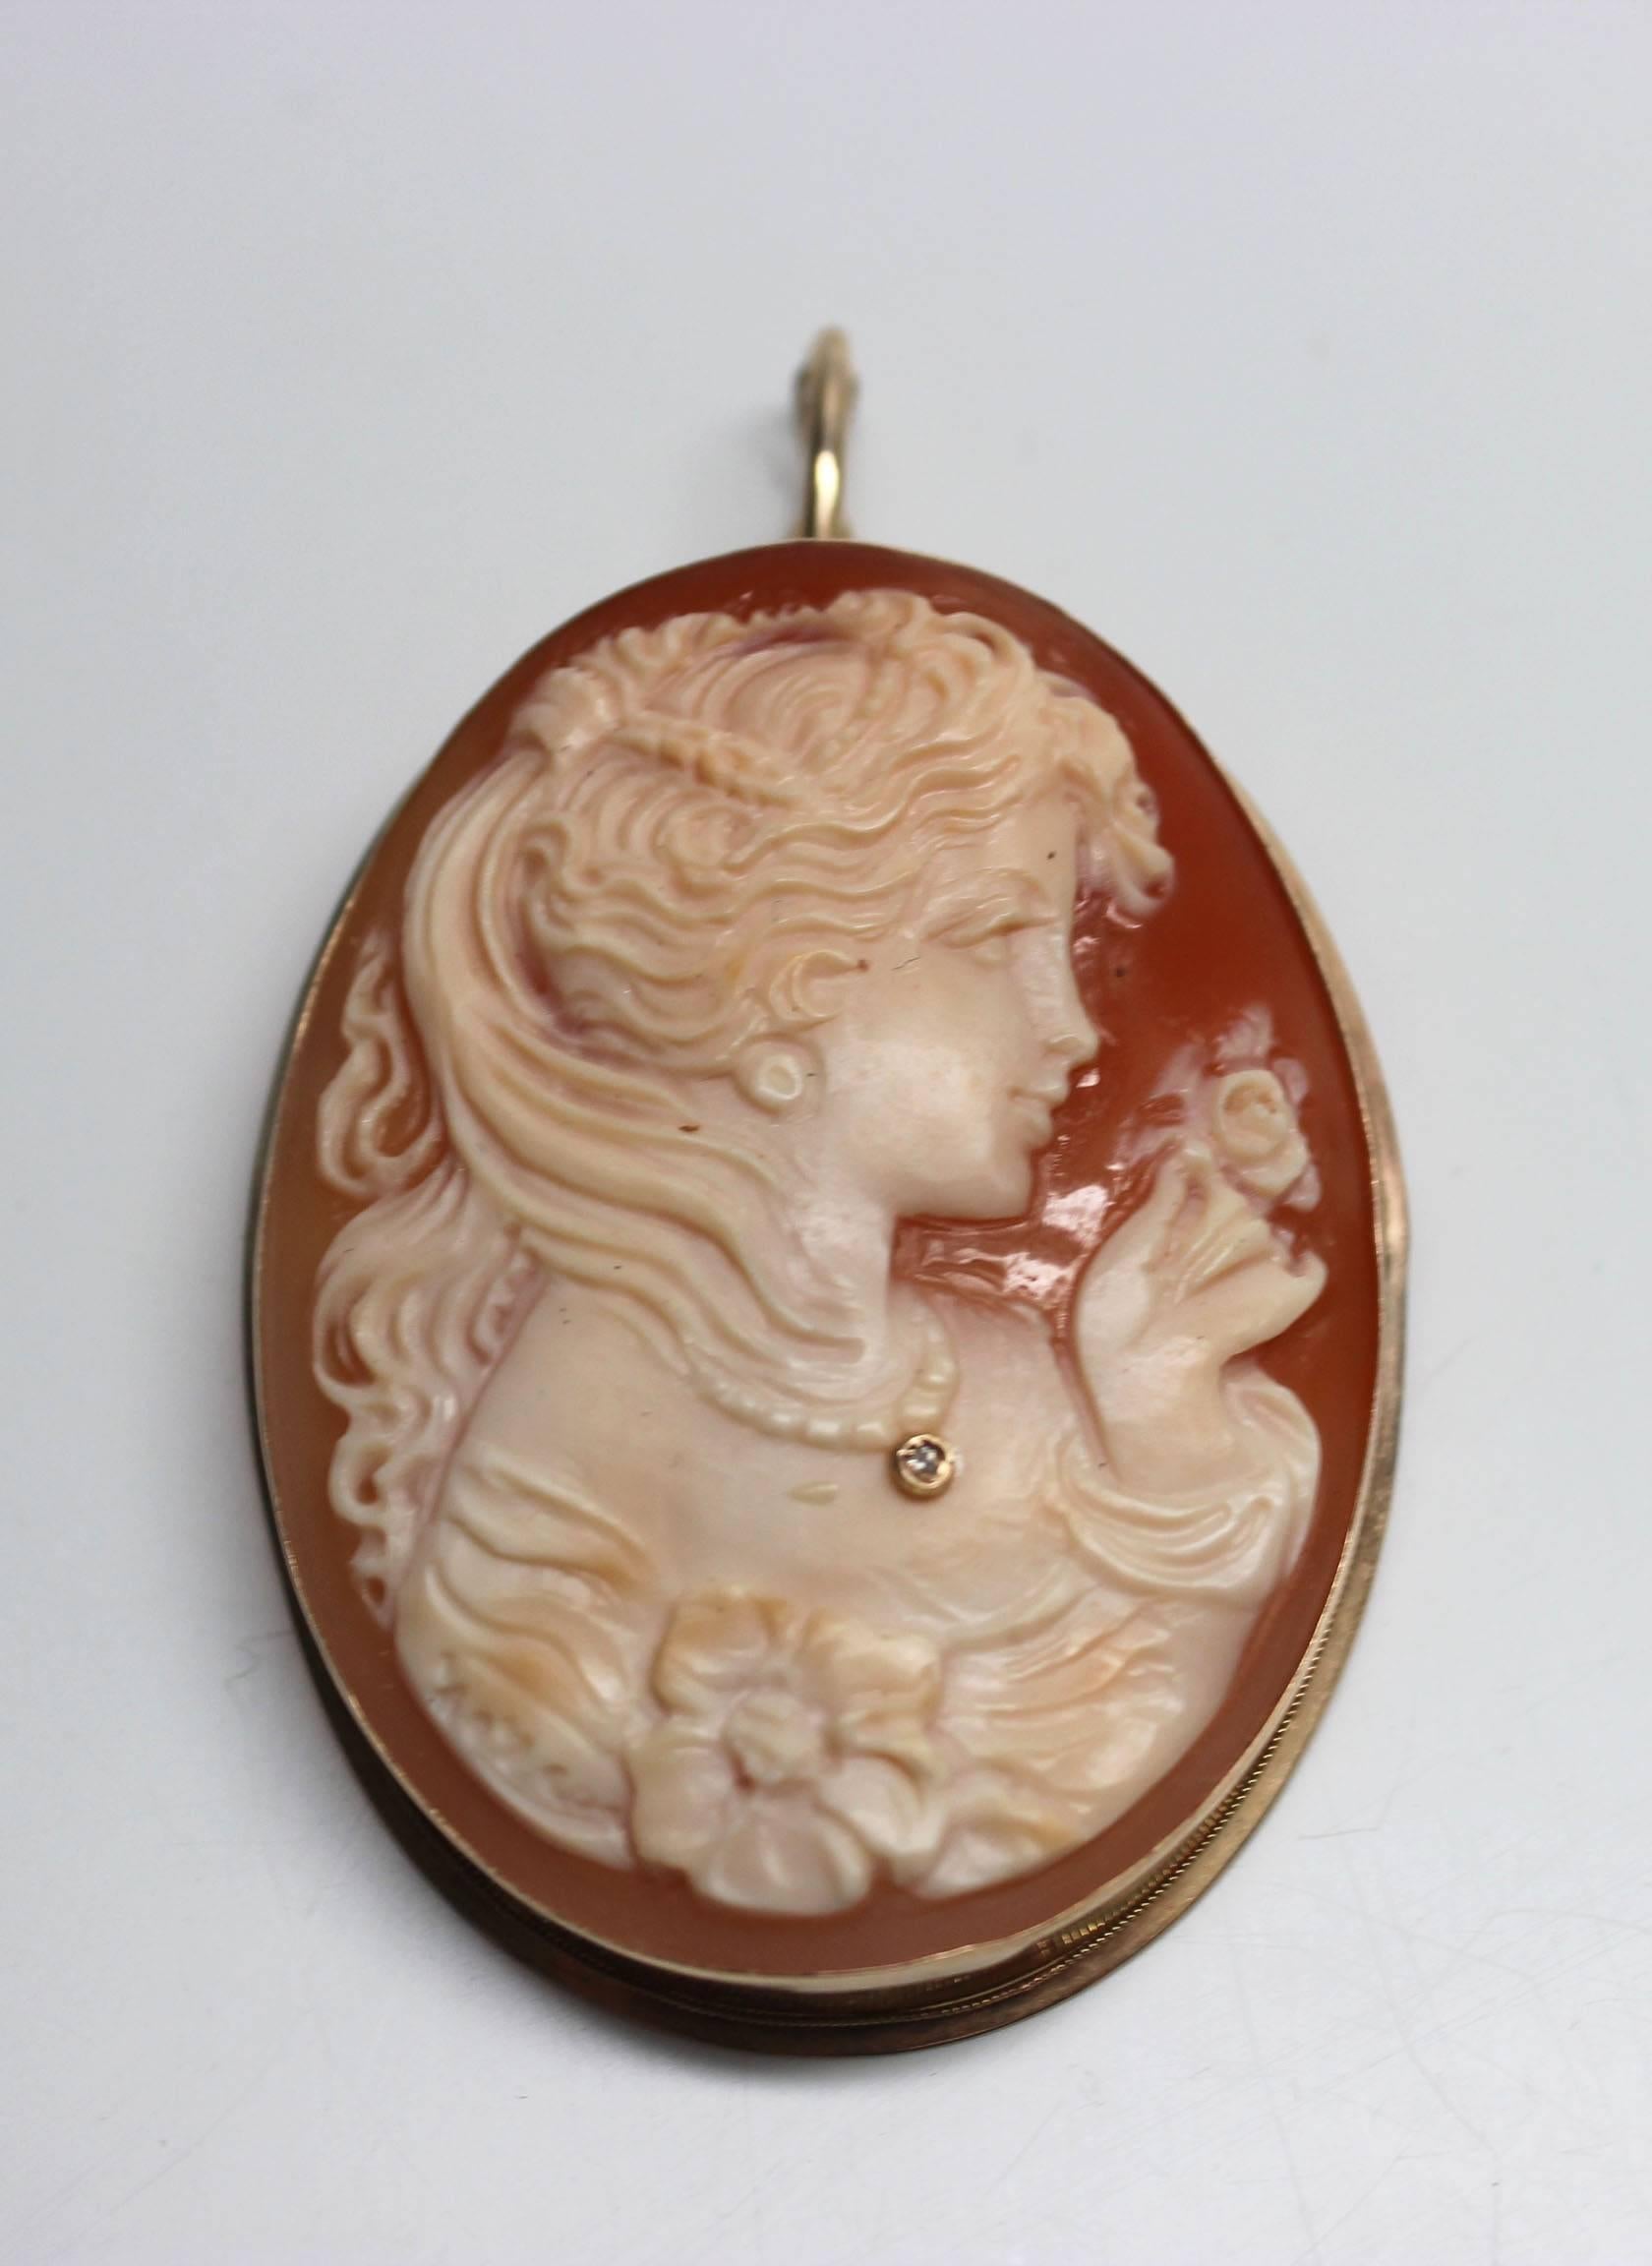 The Scognamiglio family name is synonymous with cameos. They opened a small factory in 1857 in Italy and the fine art of cameo and coral carving has been passed down in the family for six generations. This cameo dates from the 1970's, it is